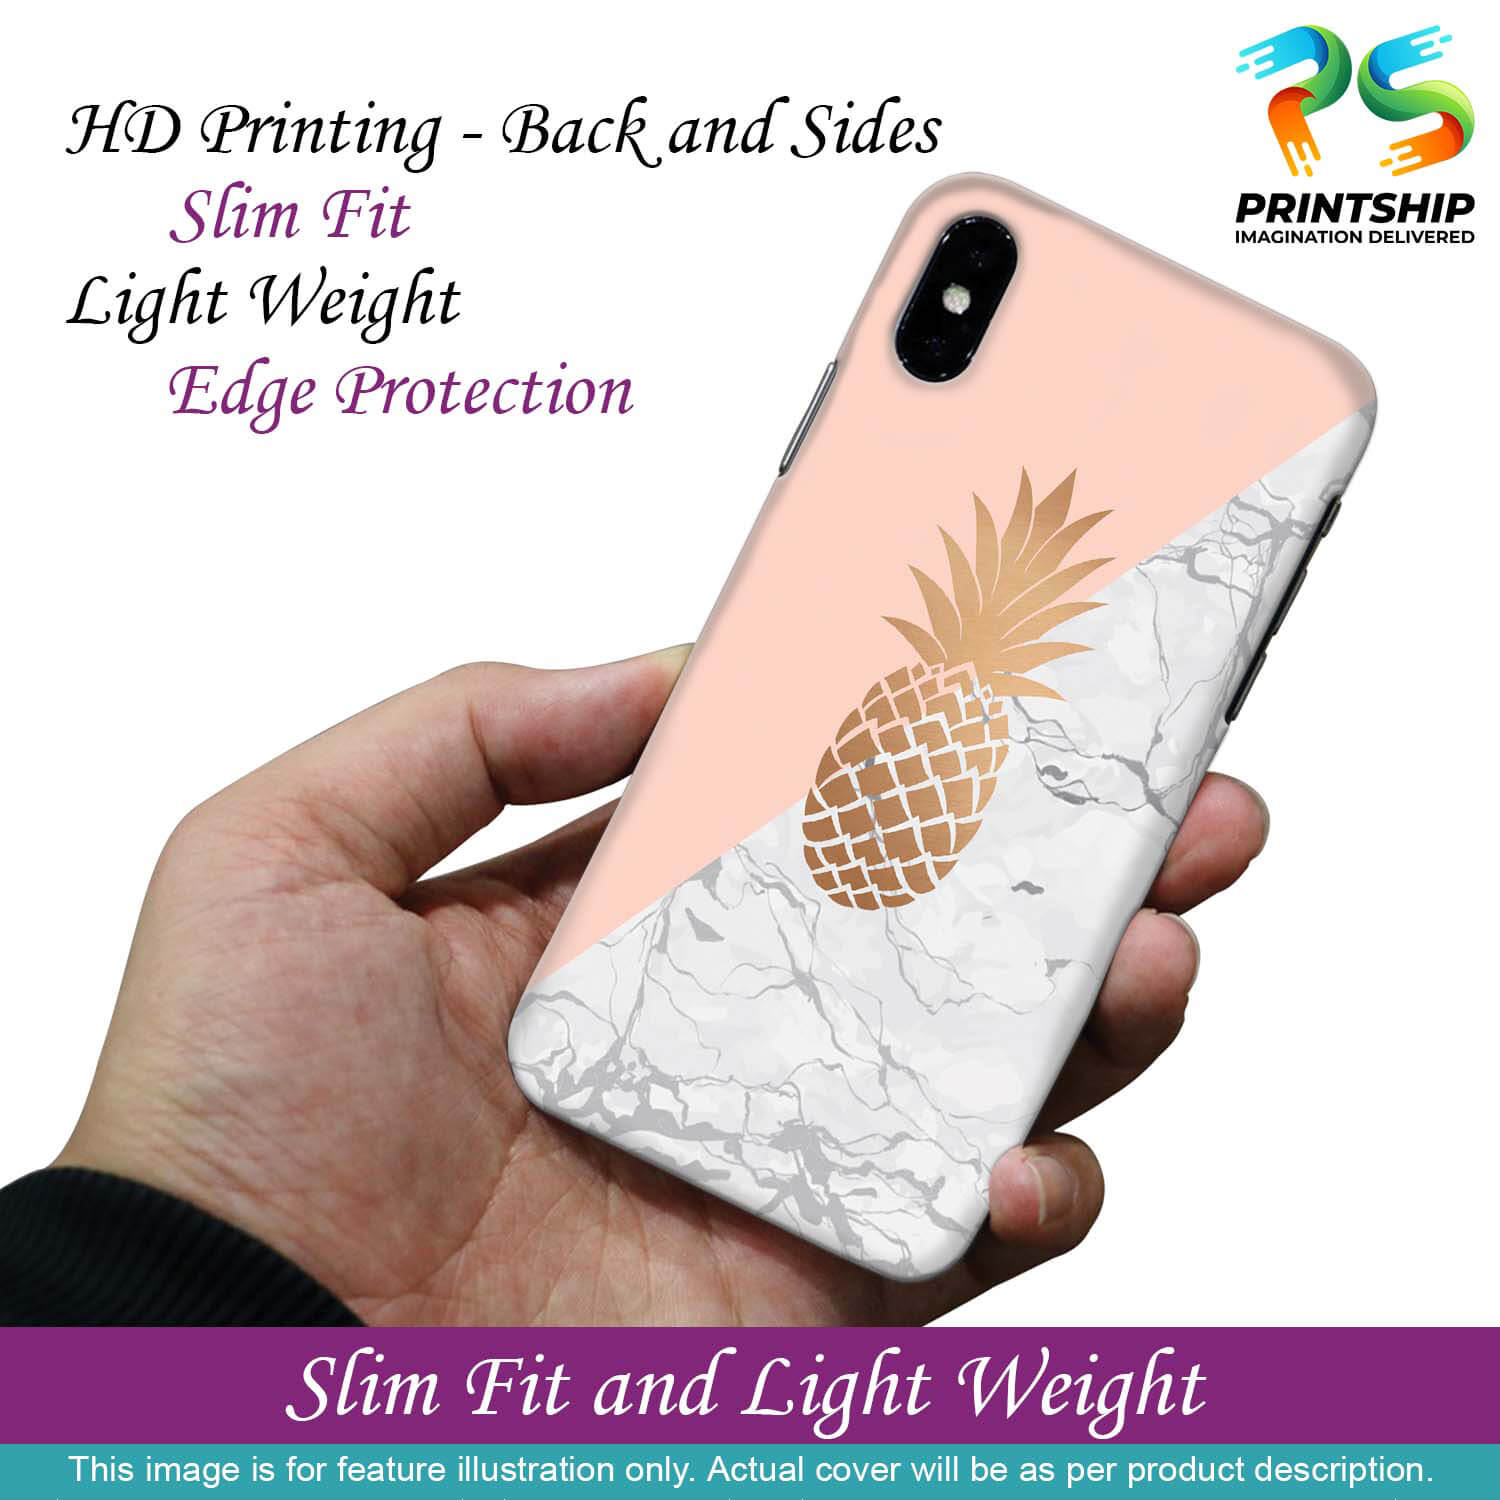 PS1330-Pineapple Marble Back Cover for Apple iPhone XS Max